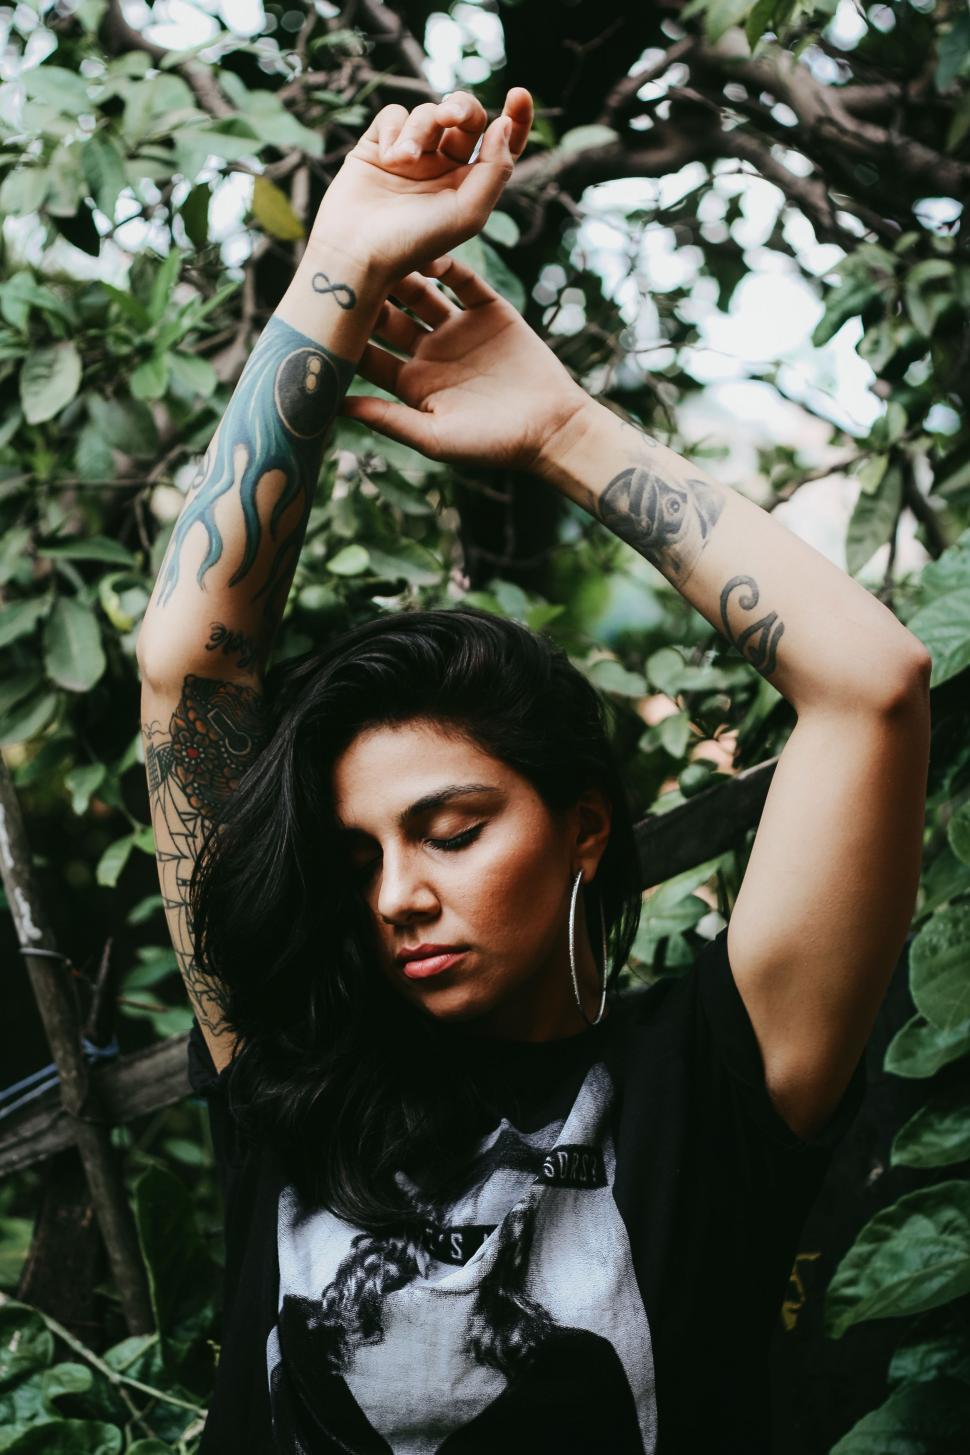 Free Image of Woman With Tattoo on Arm 